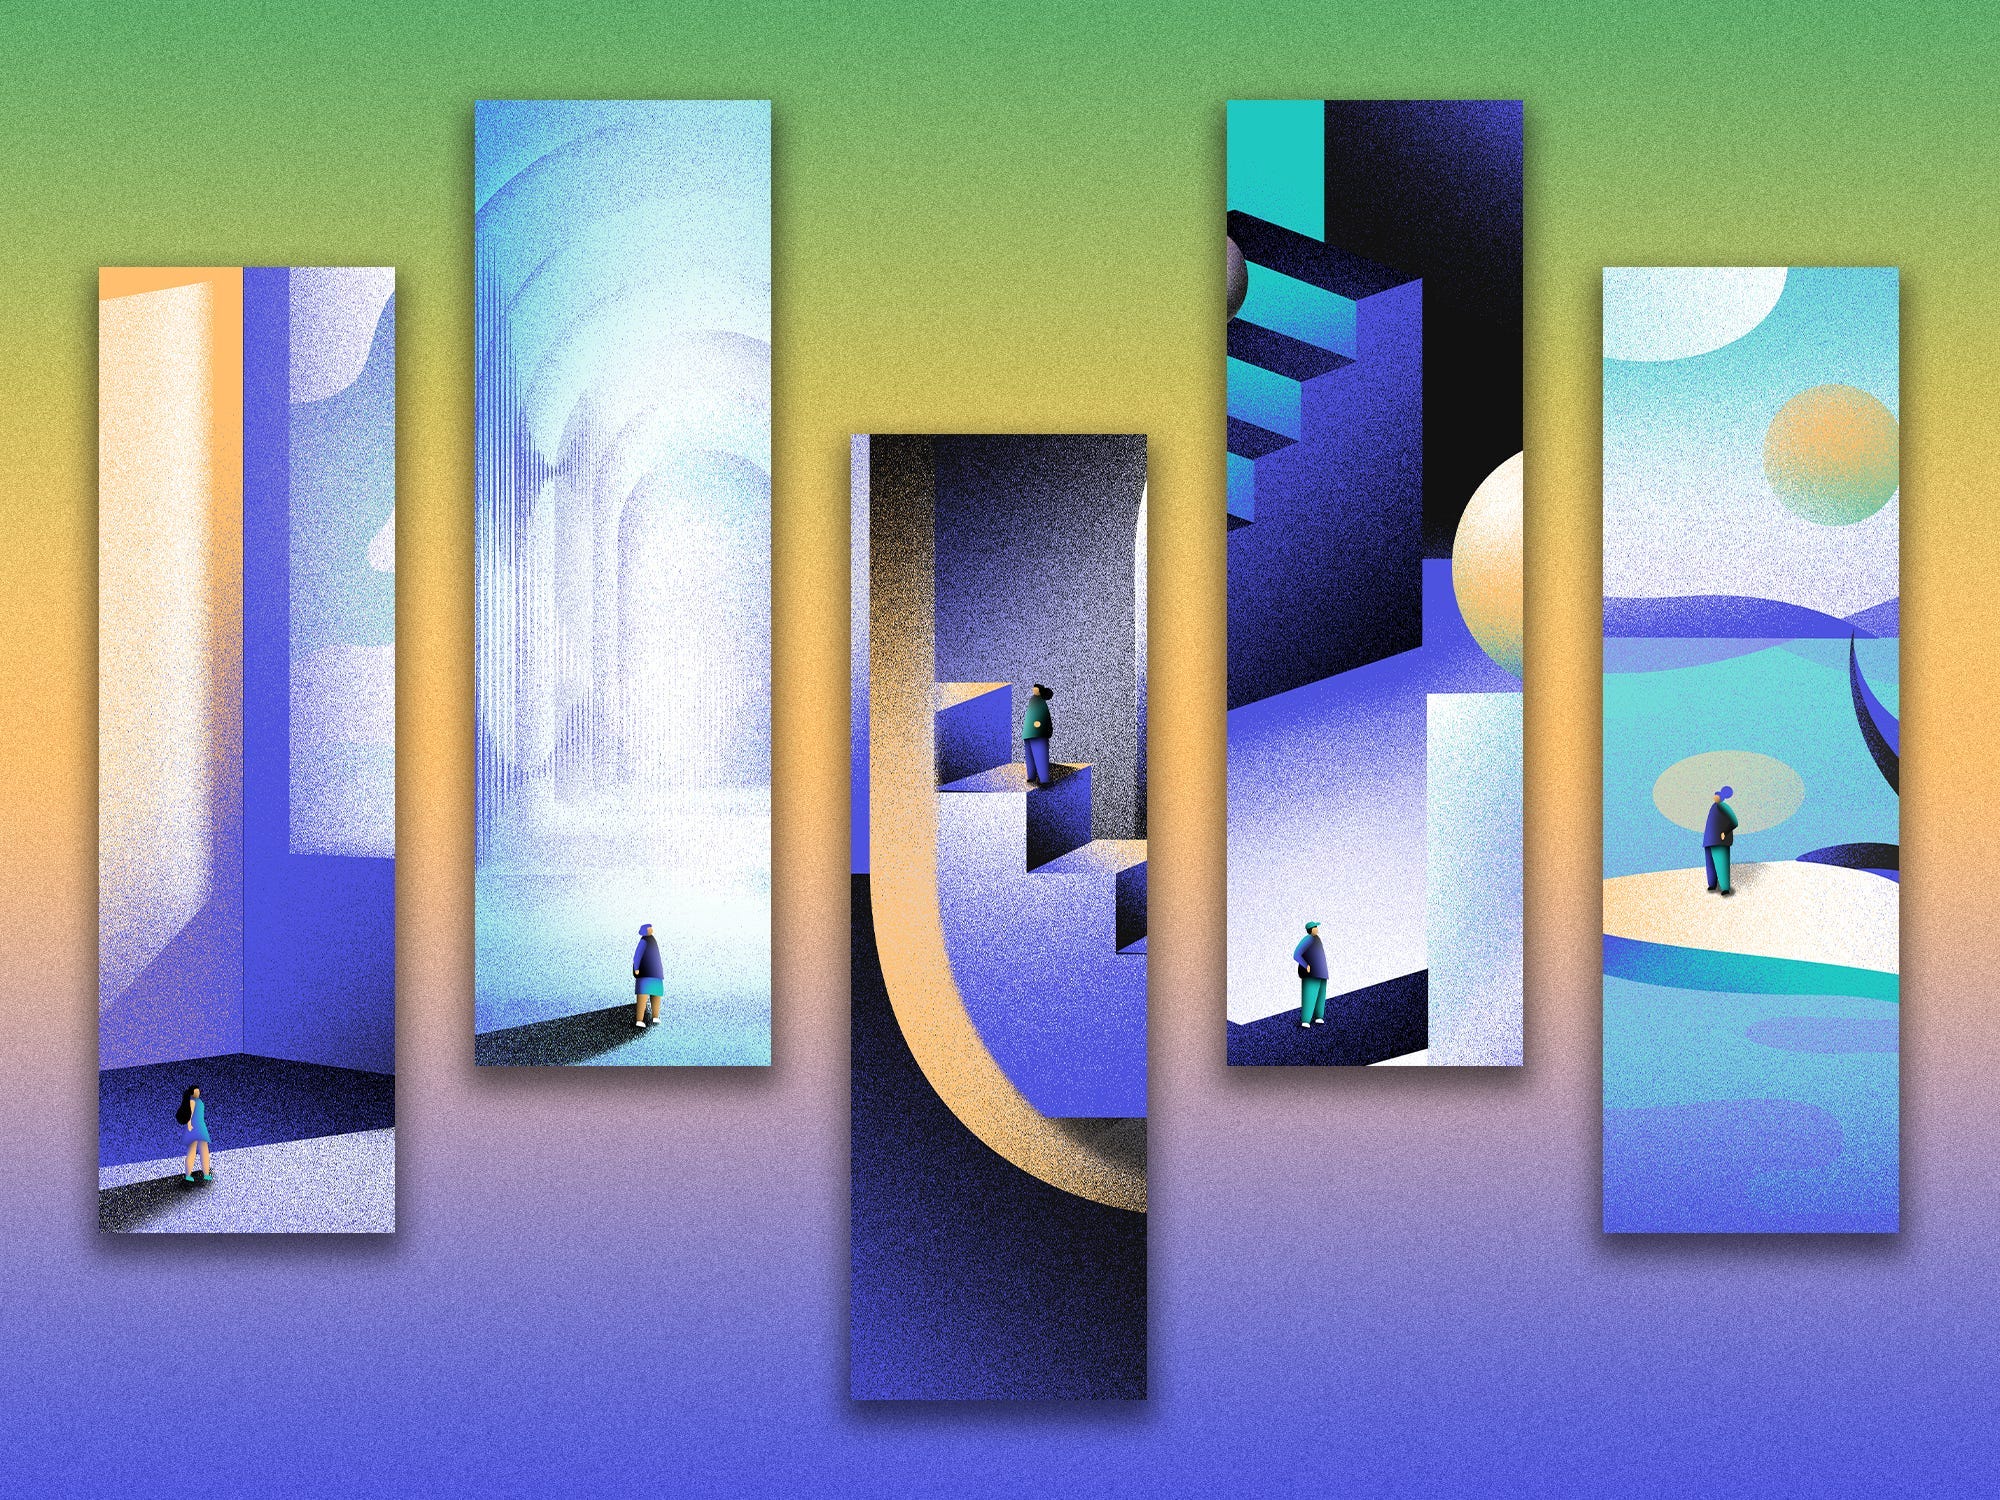 WDL 4x3 Thumbnail: five panels of illustrations featuring a person walking around different spaces illuminated with gradients of blue, gold, black, and white.